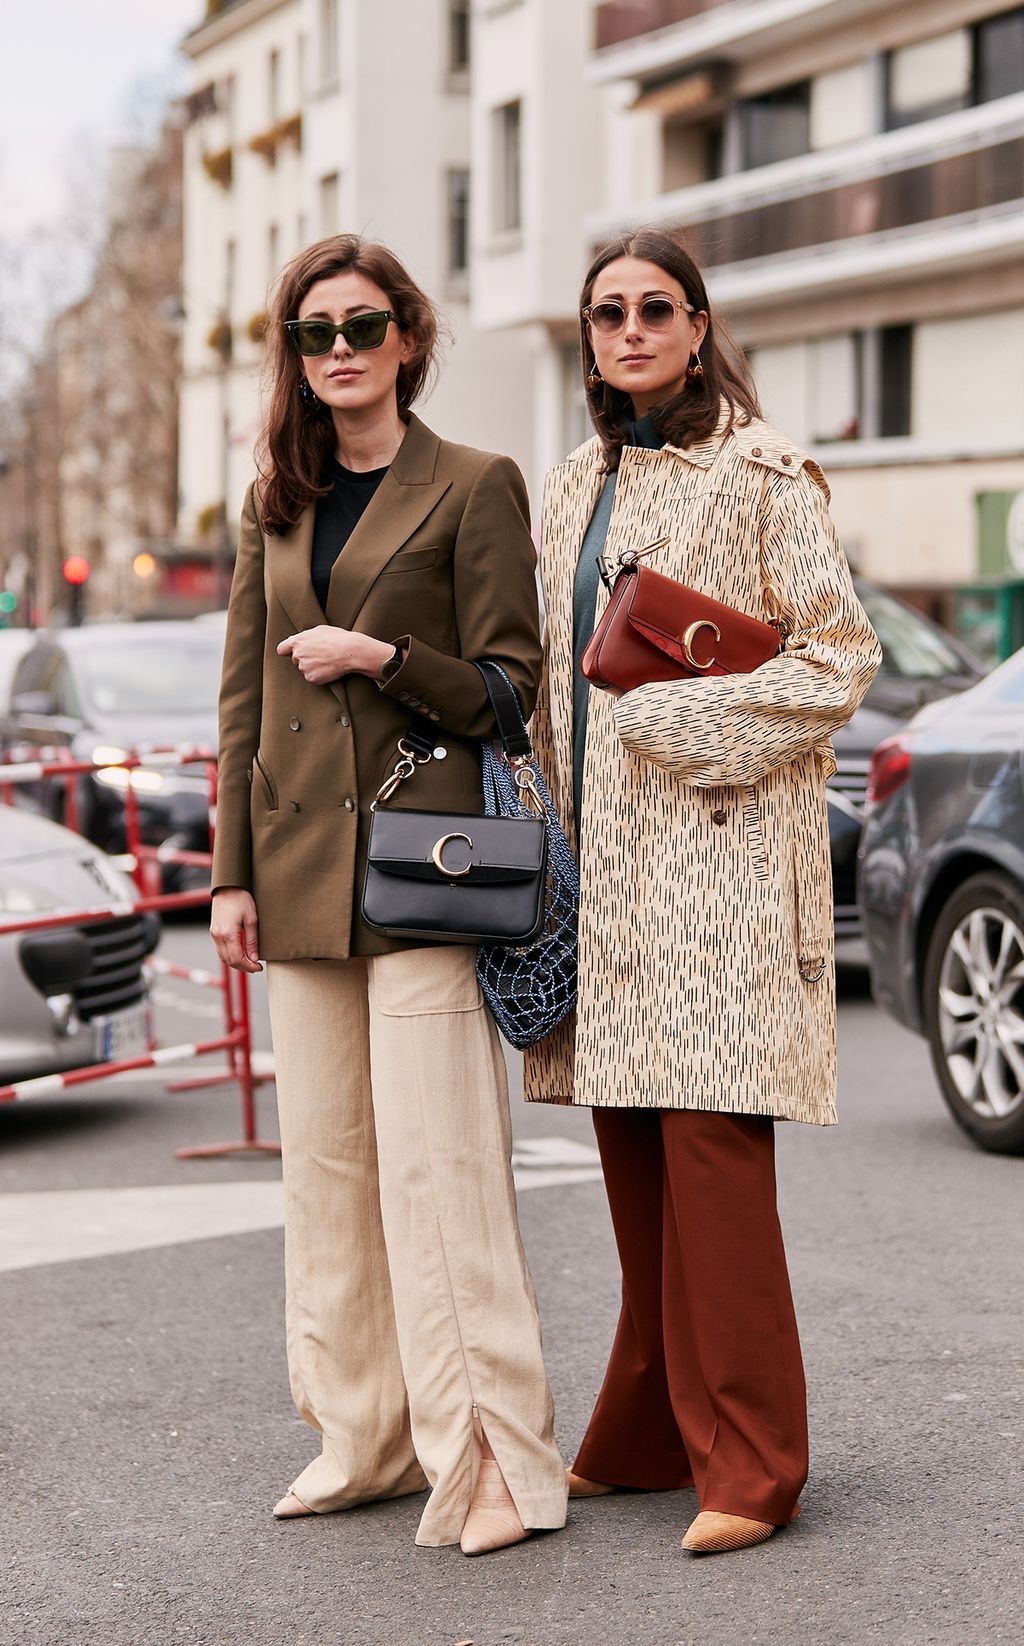 The Chloé C Bag Is Spring's New It Bag | Who What Wear